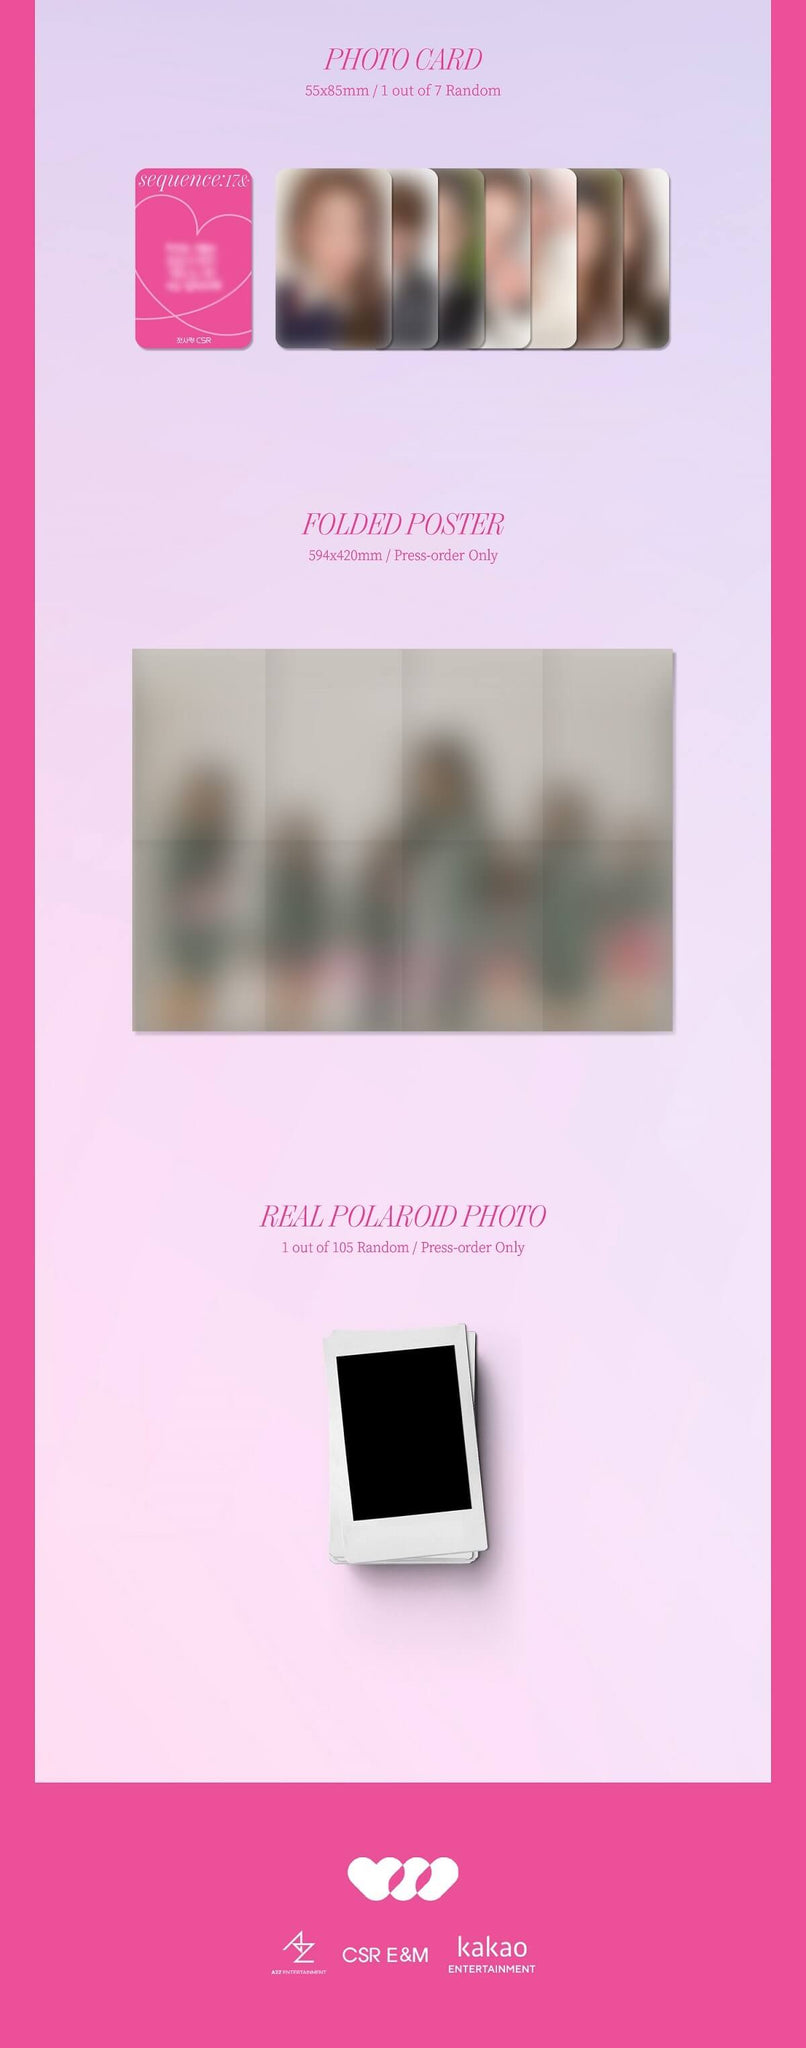 CSR 1st Single Album Sequence : 17& Inclusions Photocard 1st Press Folded Poster Real Polaroid Photo